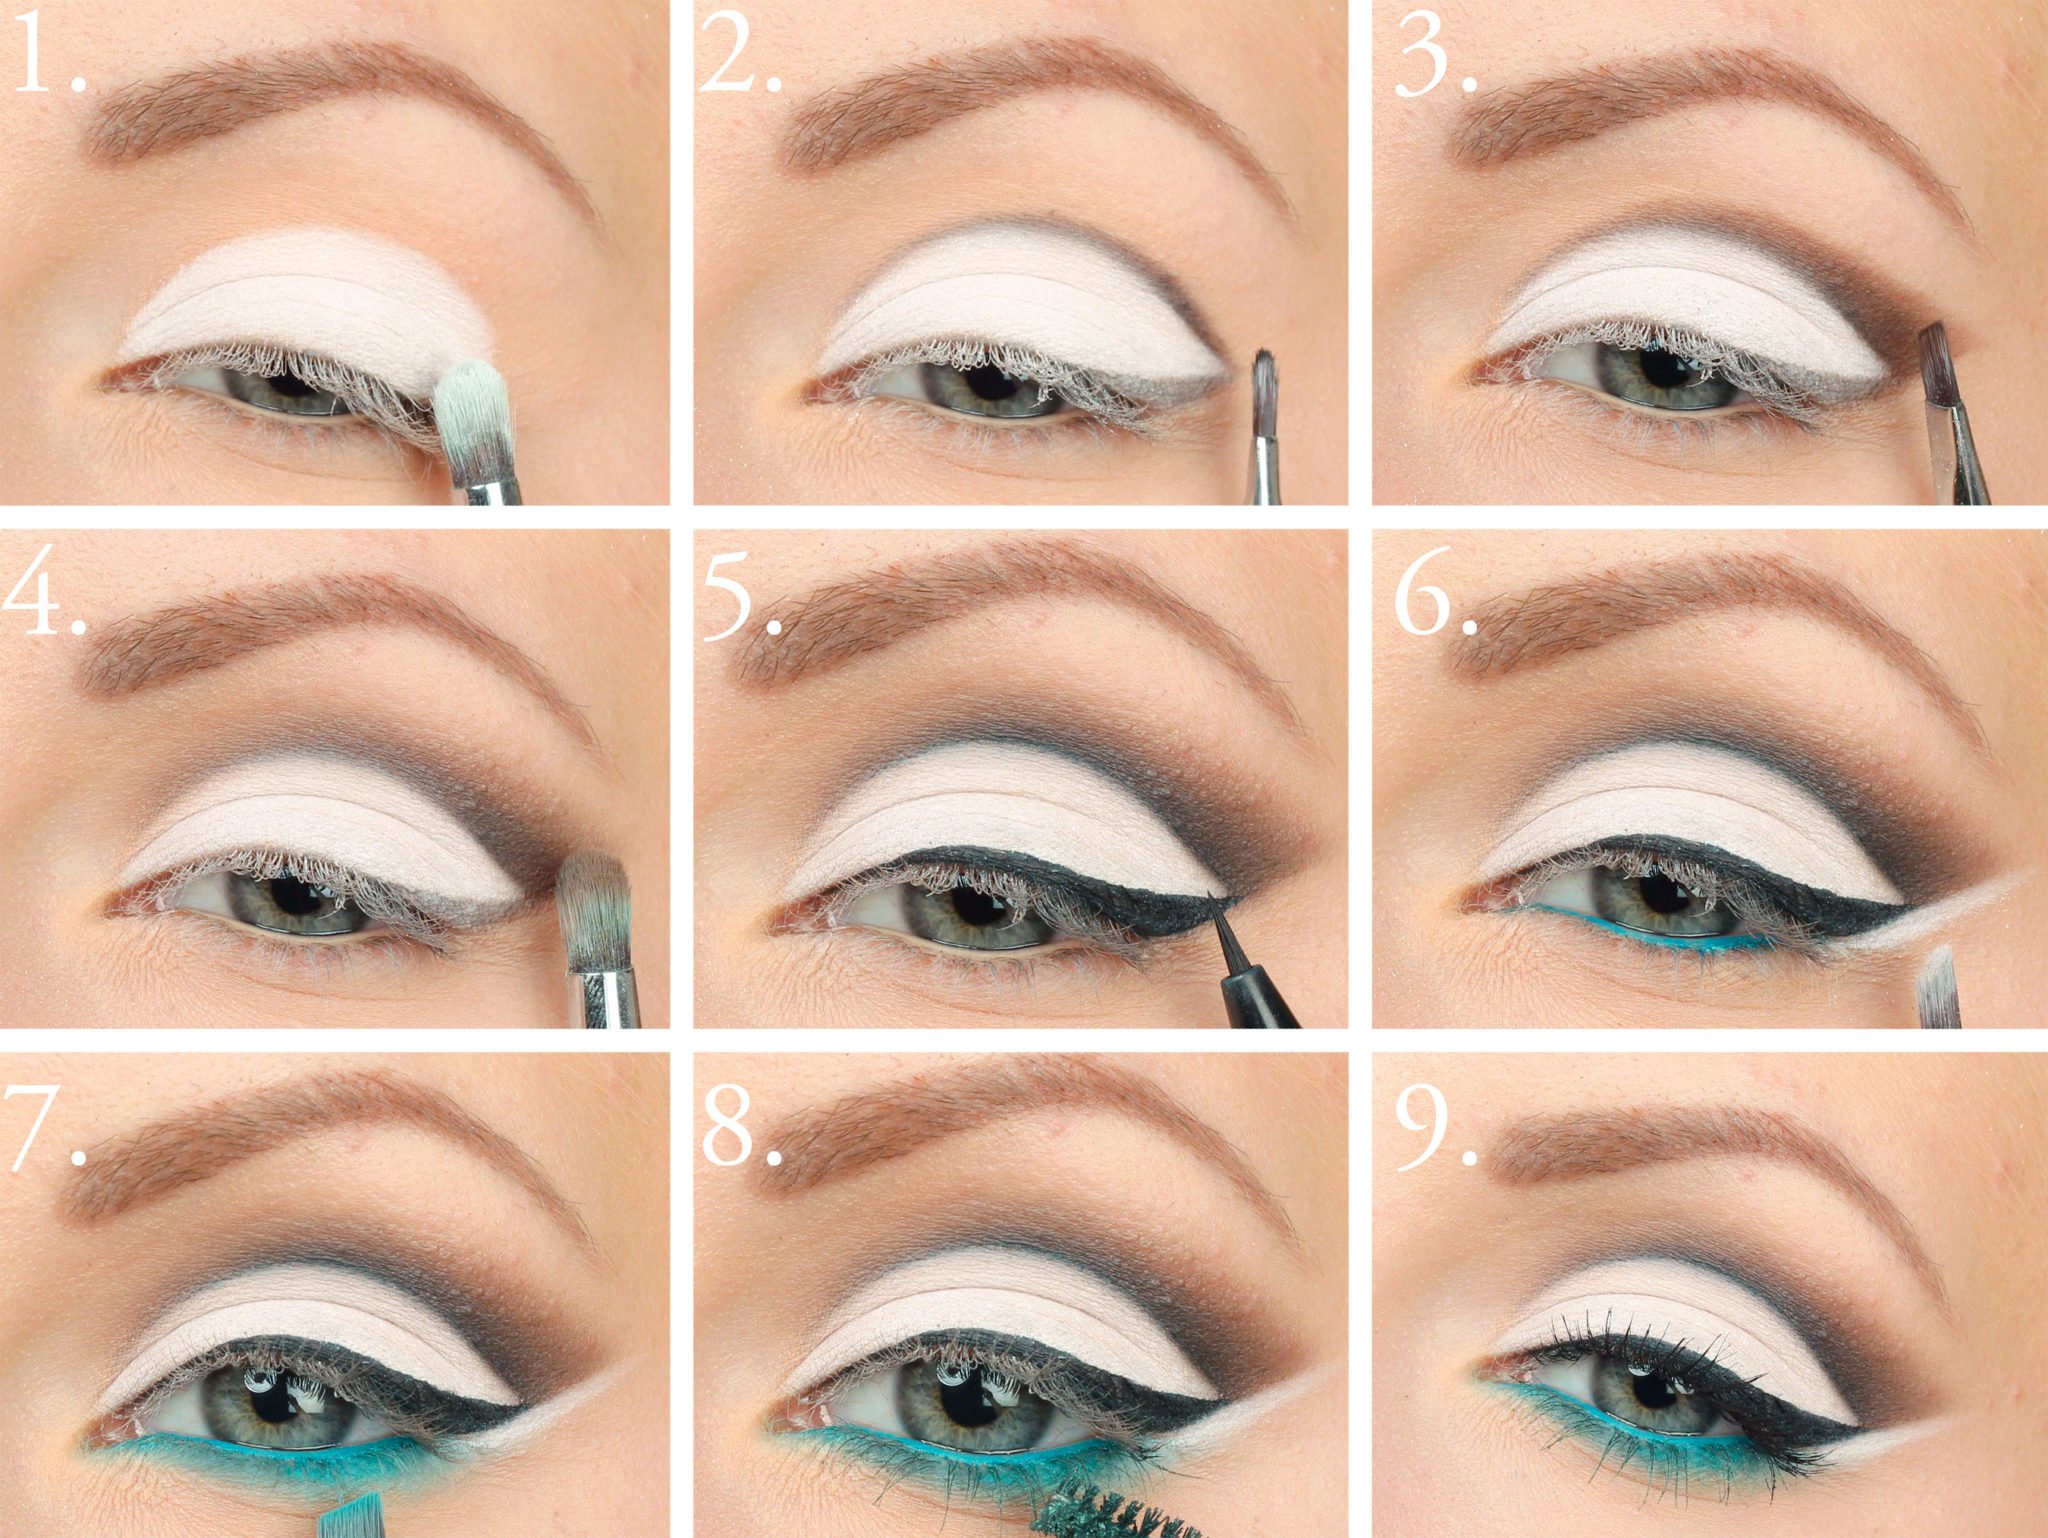 How to put makeup on hooded eyes